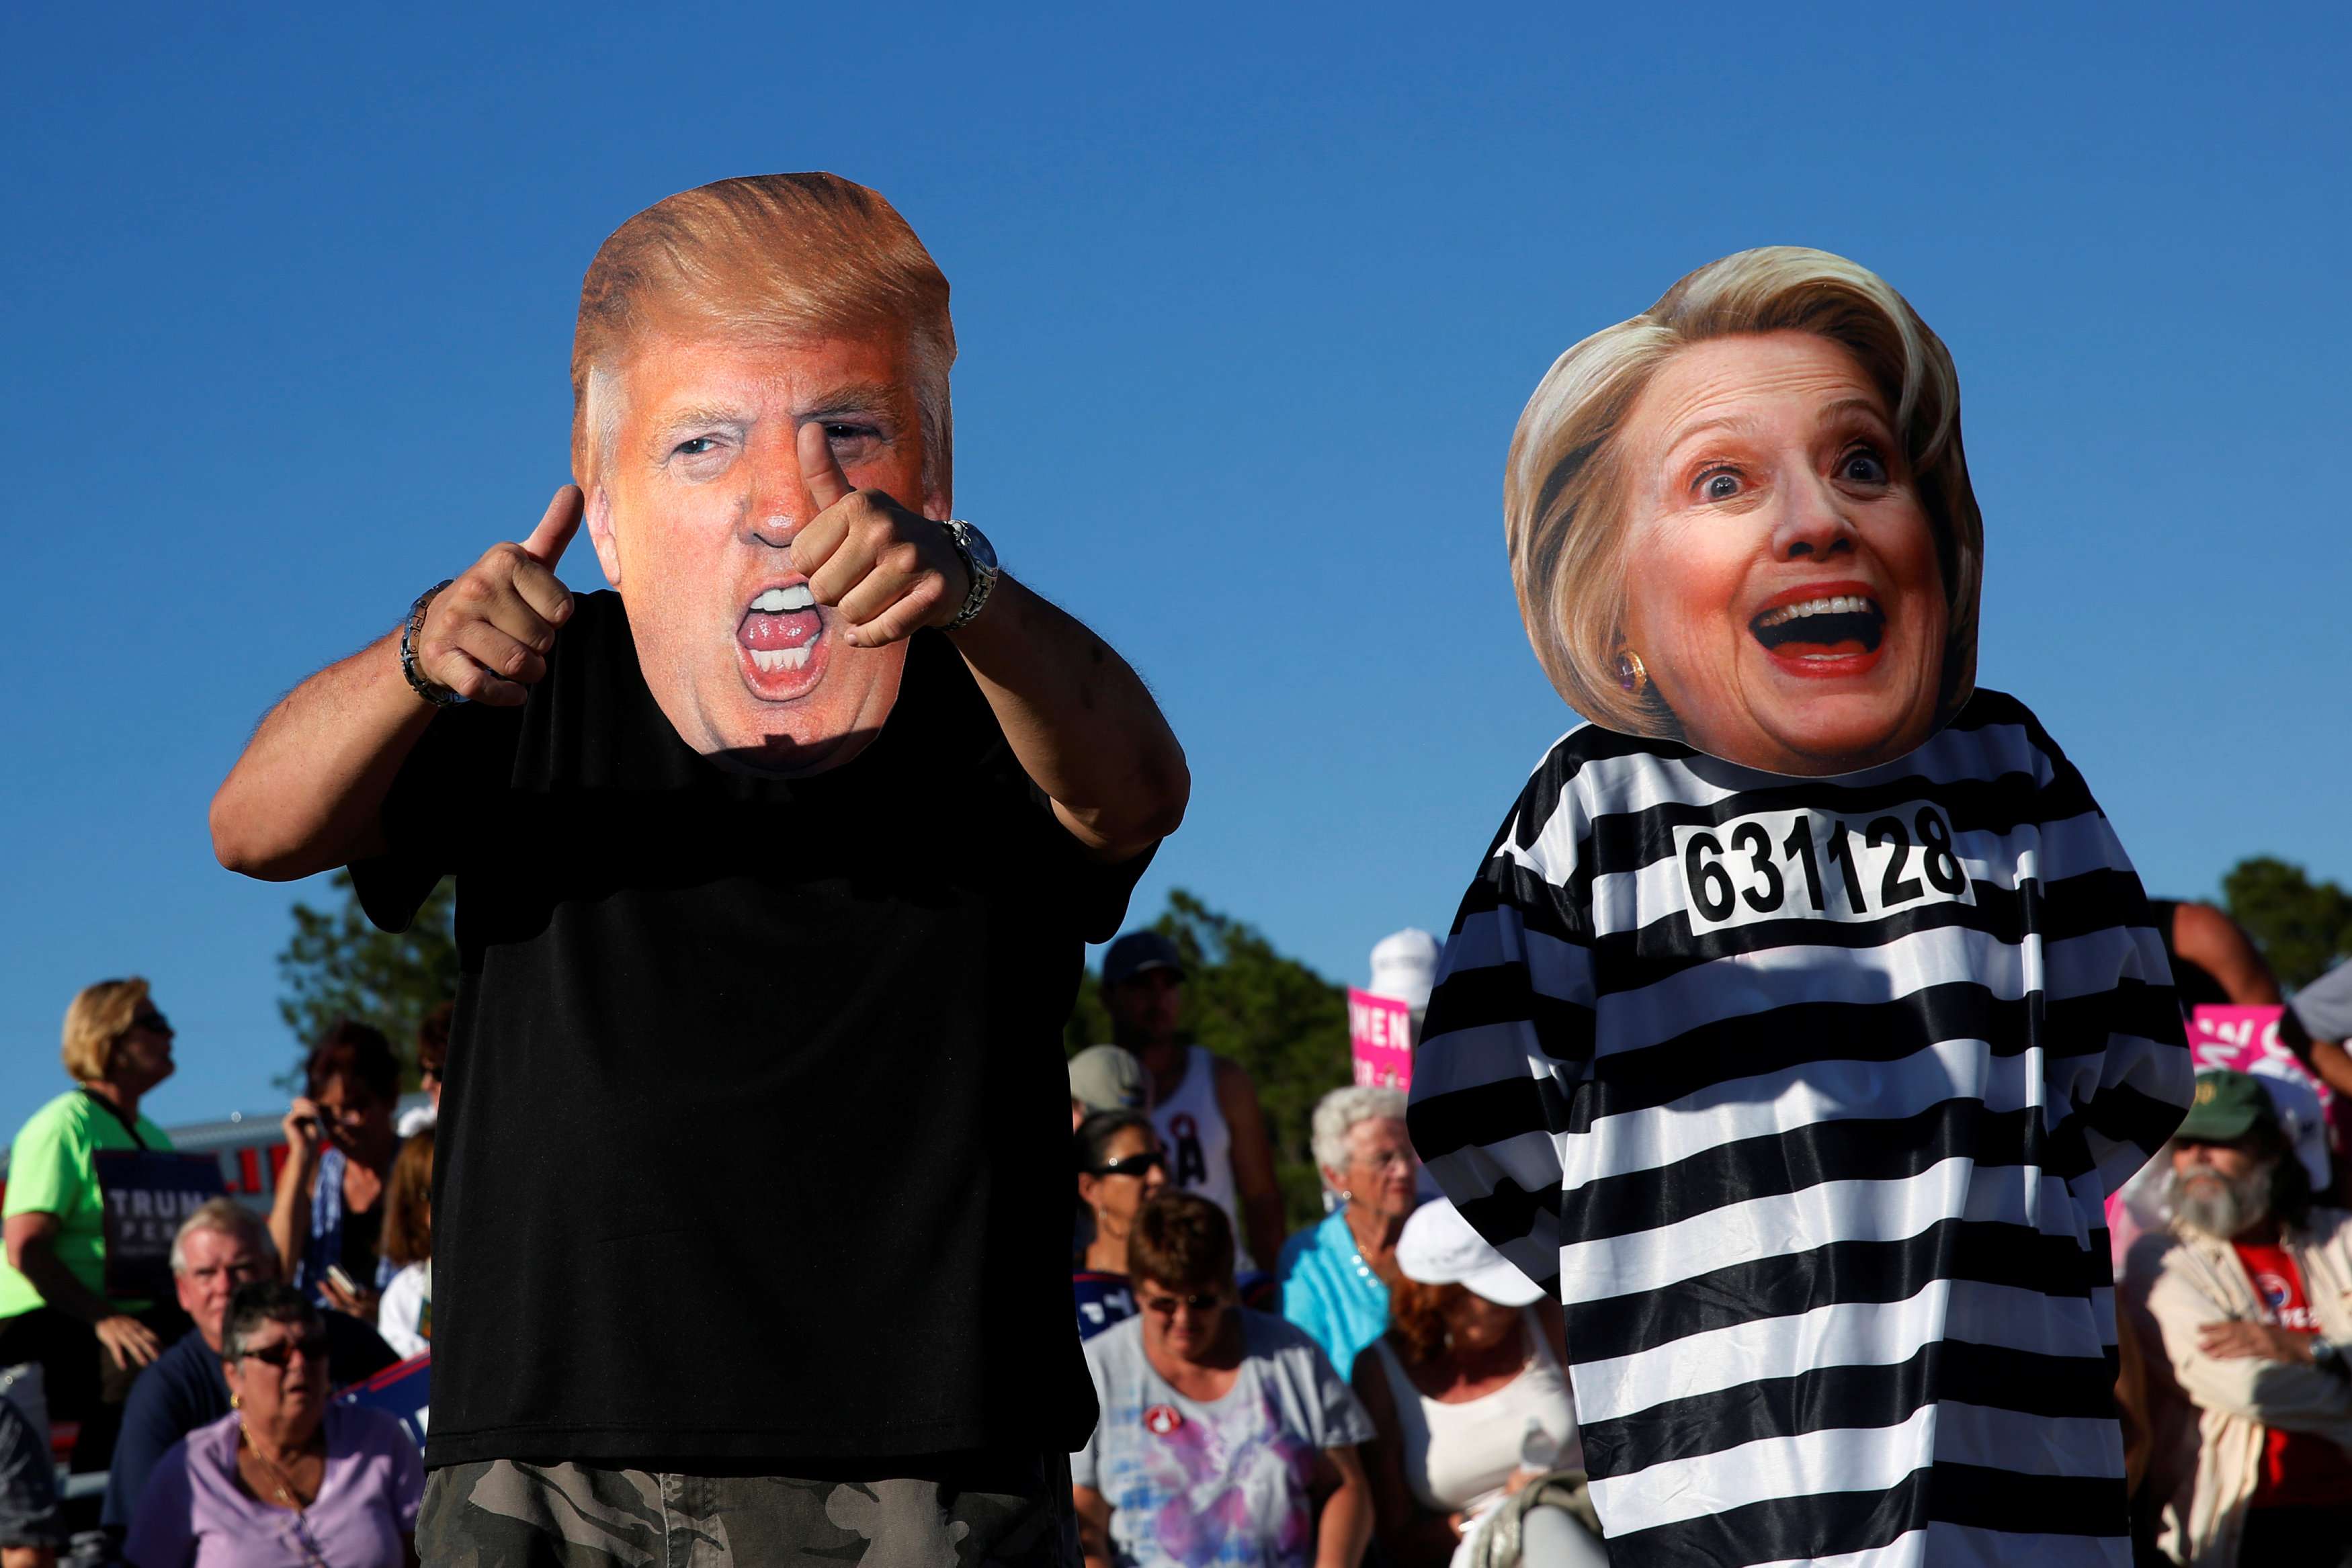 Americans dress up as Donald Trump and Hillary Clinton at a campaign rally in Naples, Florida, last month. Photo: Reuters